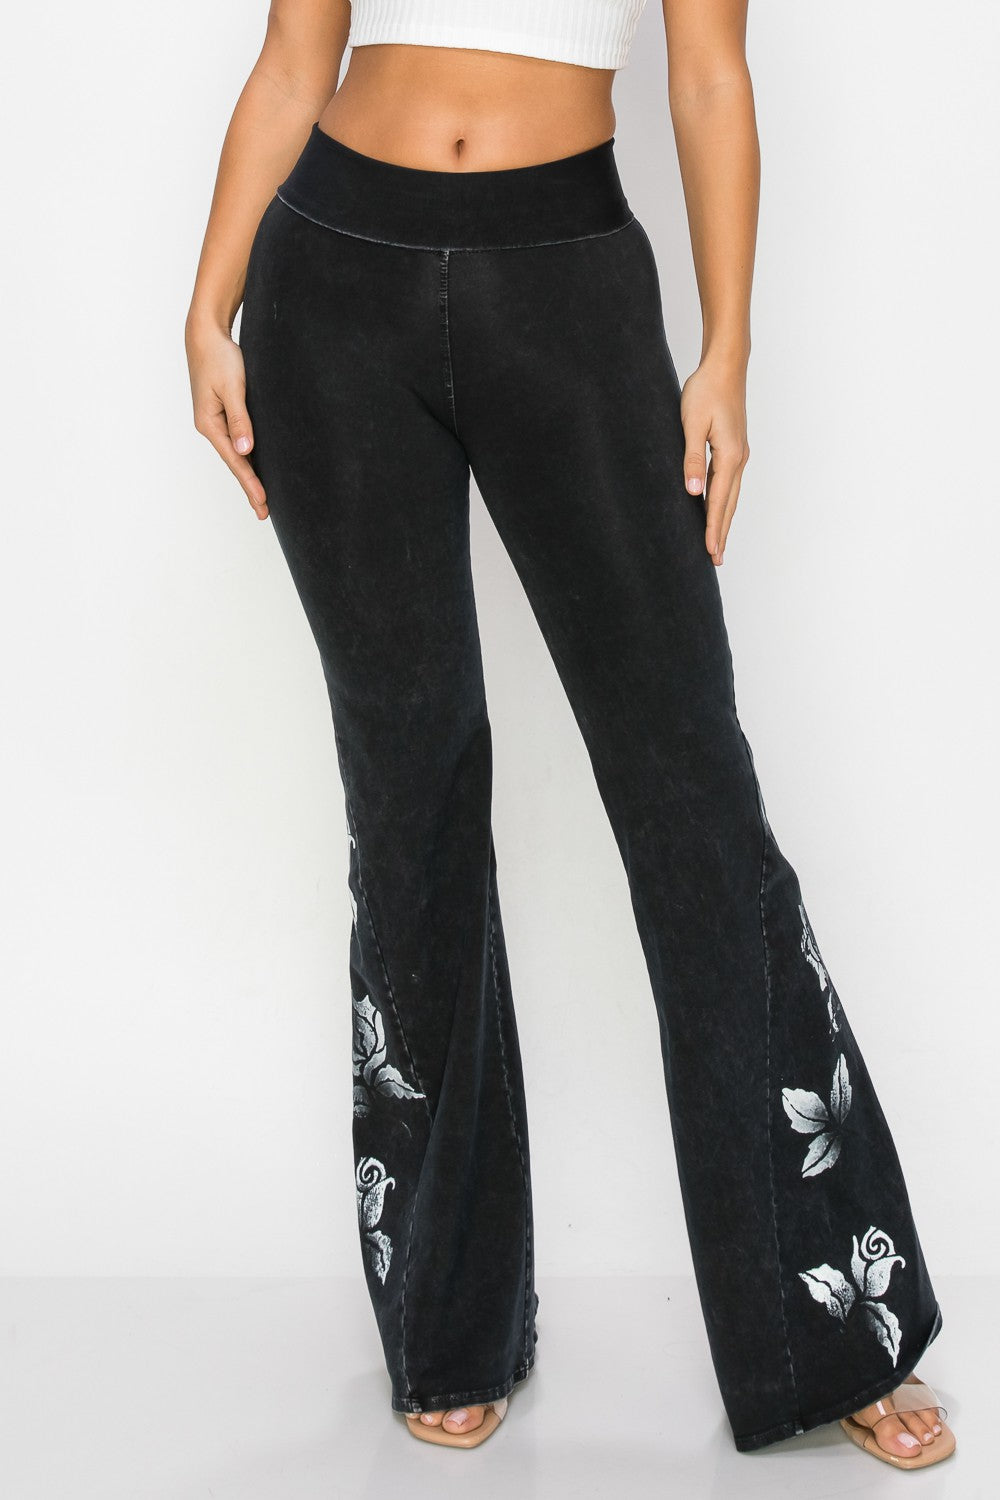 Black Pants with Printed White Rose Design